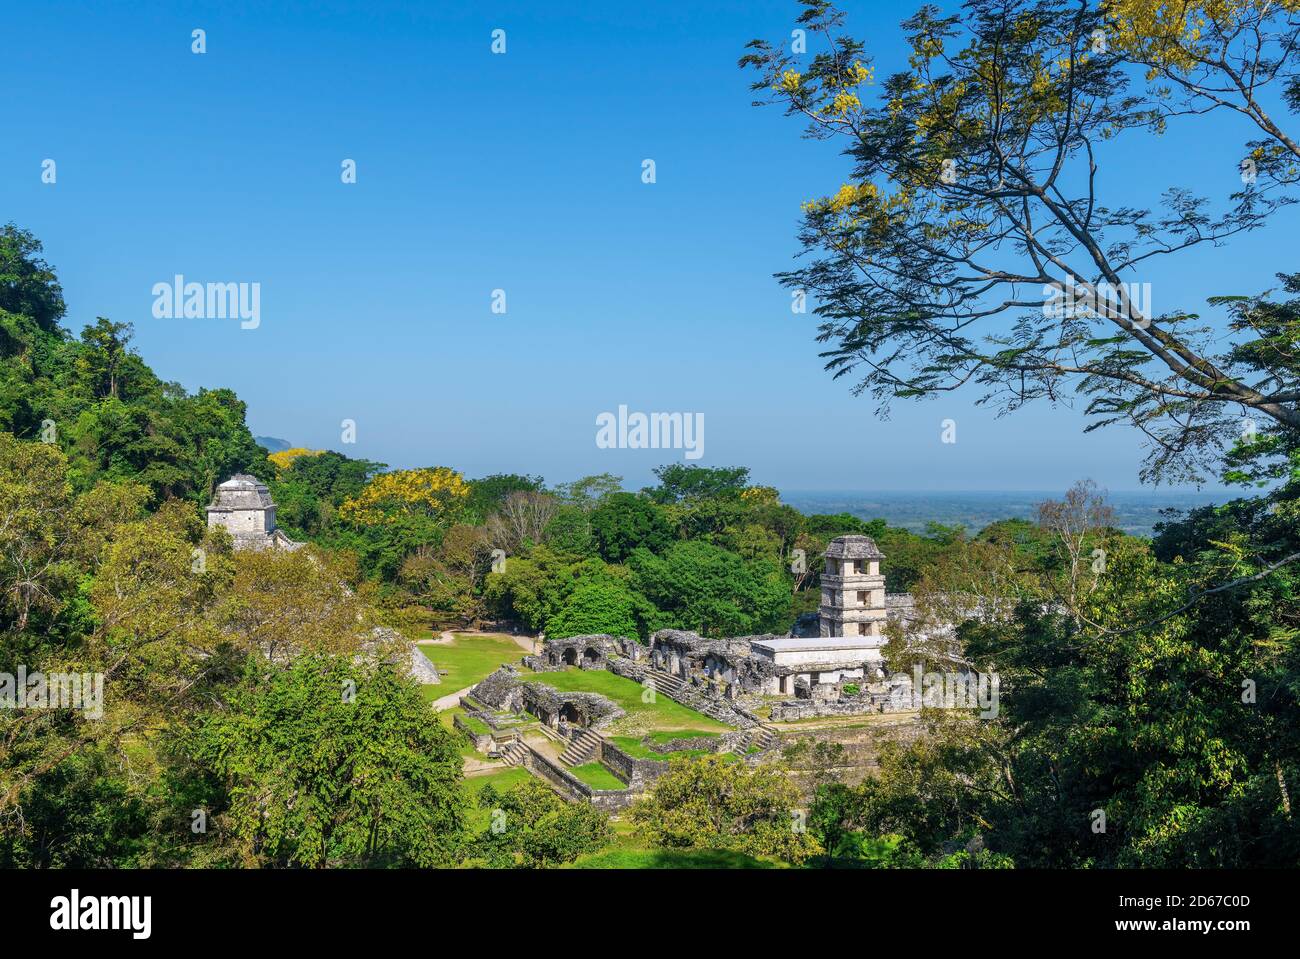 Cityscape of the Maya ruin Palenque in the rainforest with the Temple of Inscriptions pyramid and the Palace, Chiapas, Mexico. Stock Photo